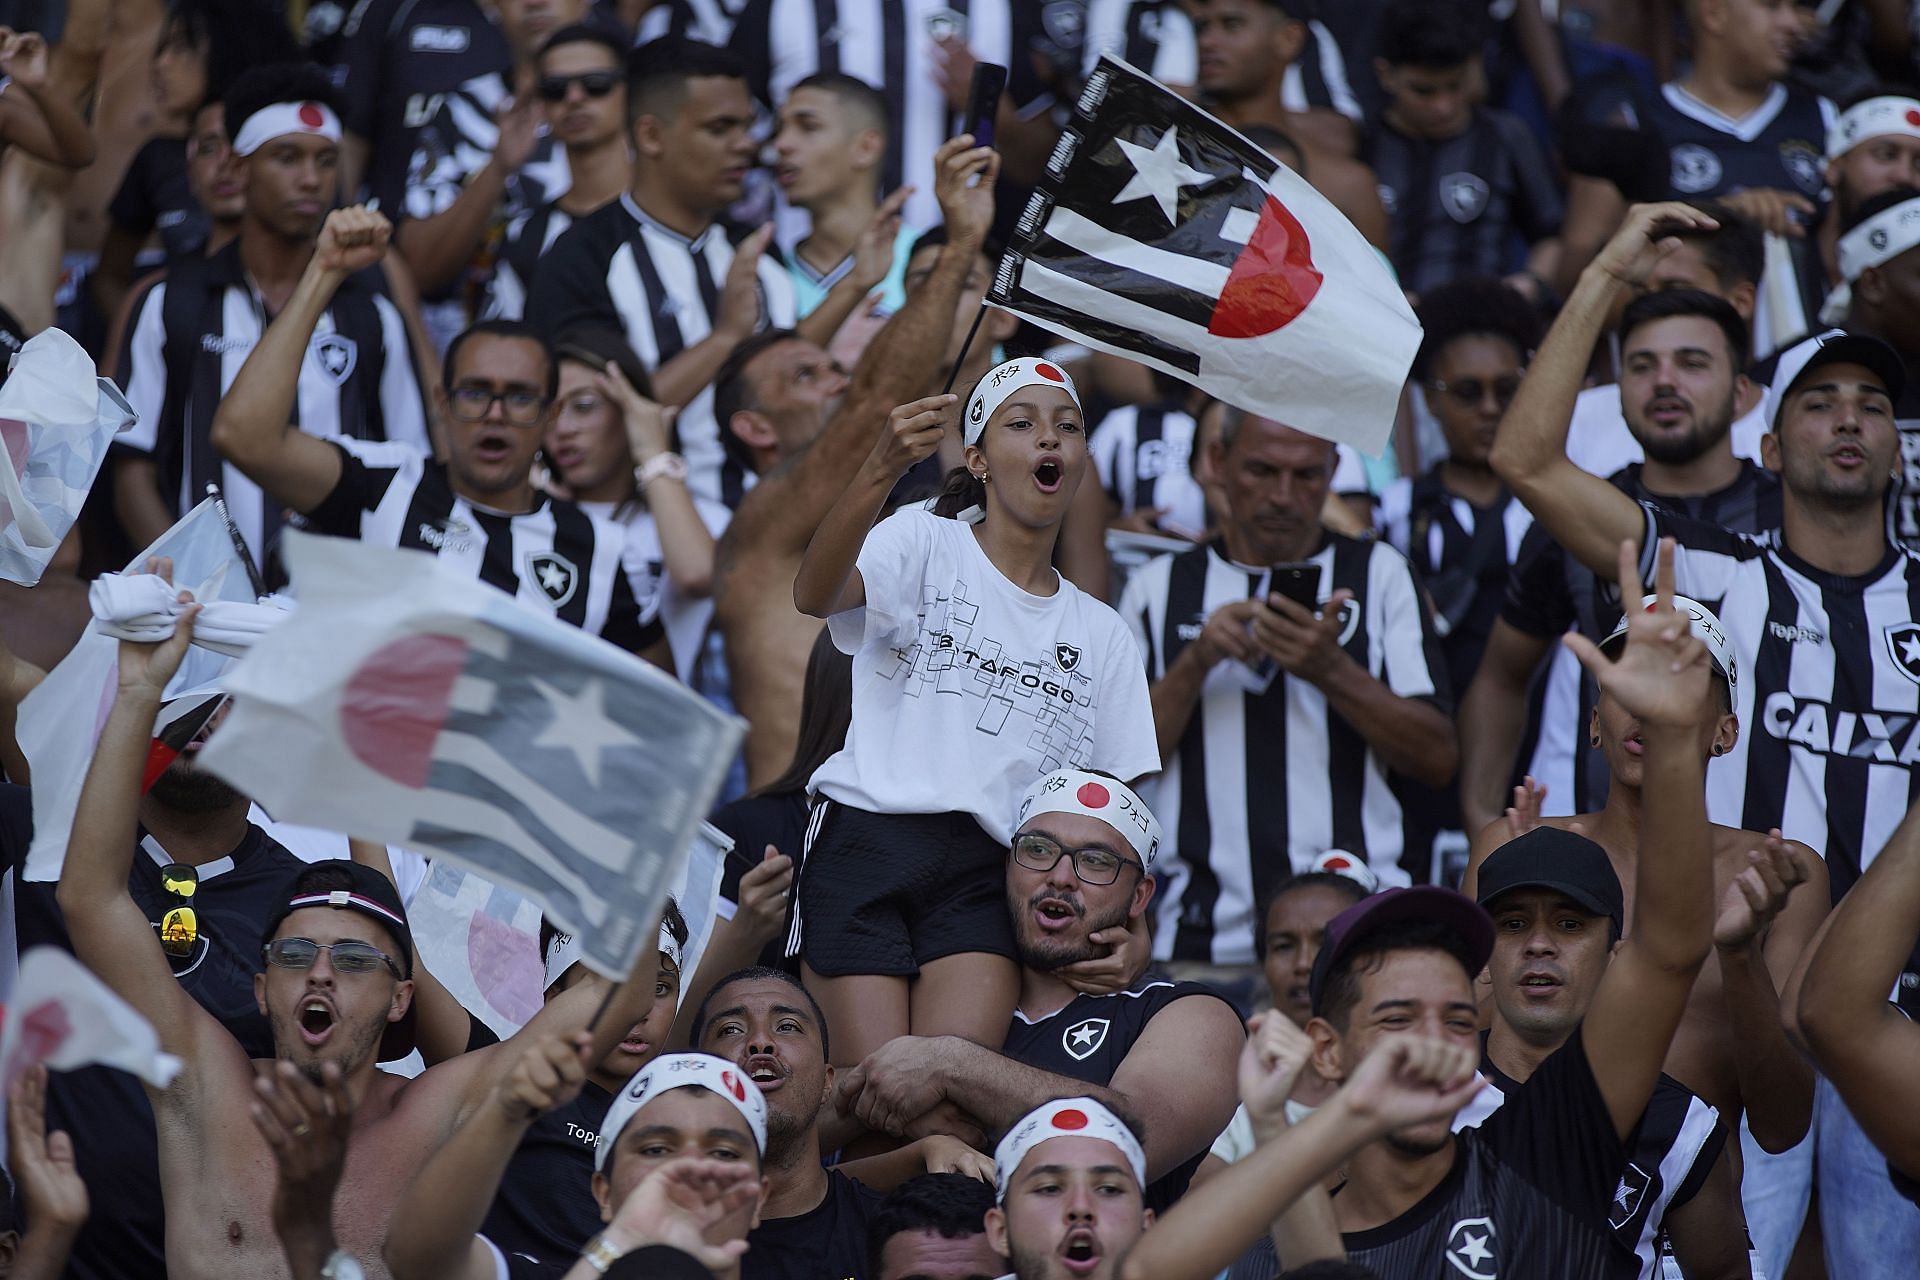 Keisuke Honda Of Botafogo Is Officially Presented To Fans